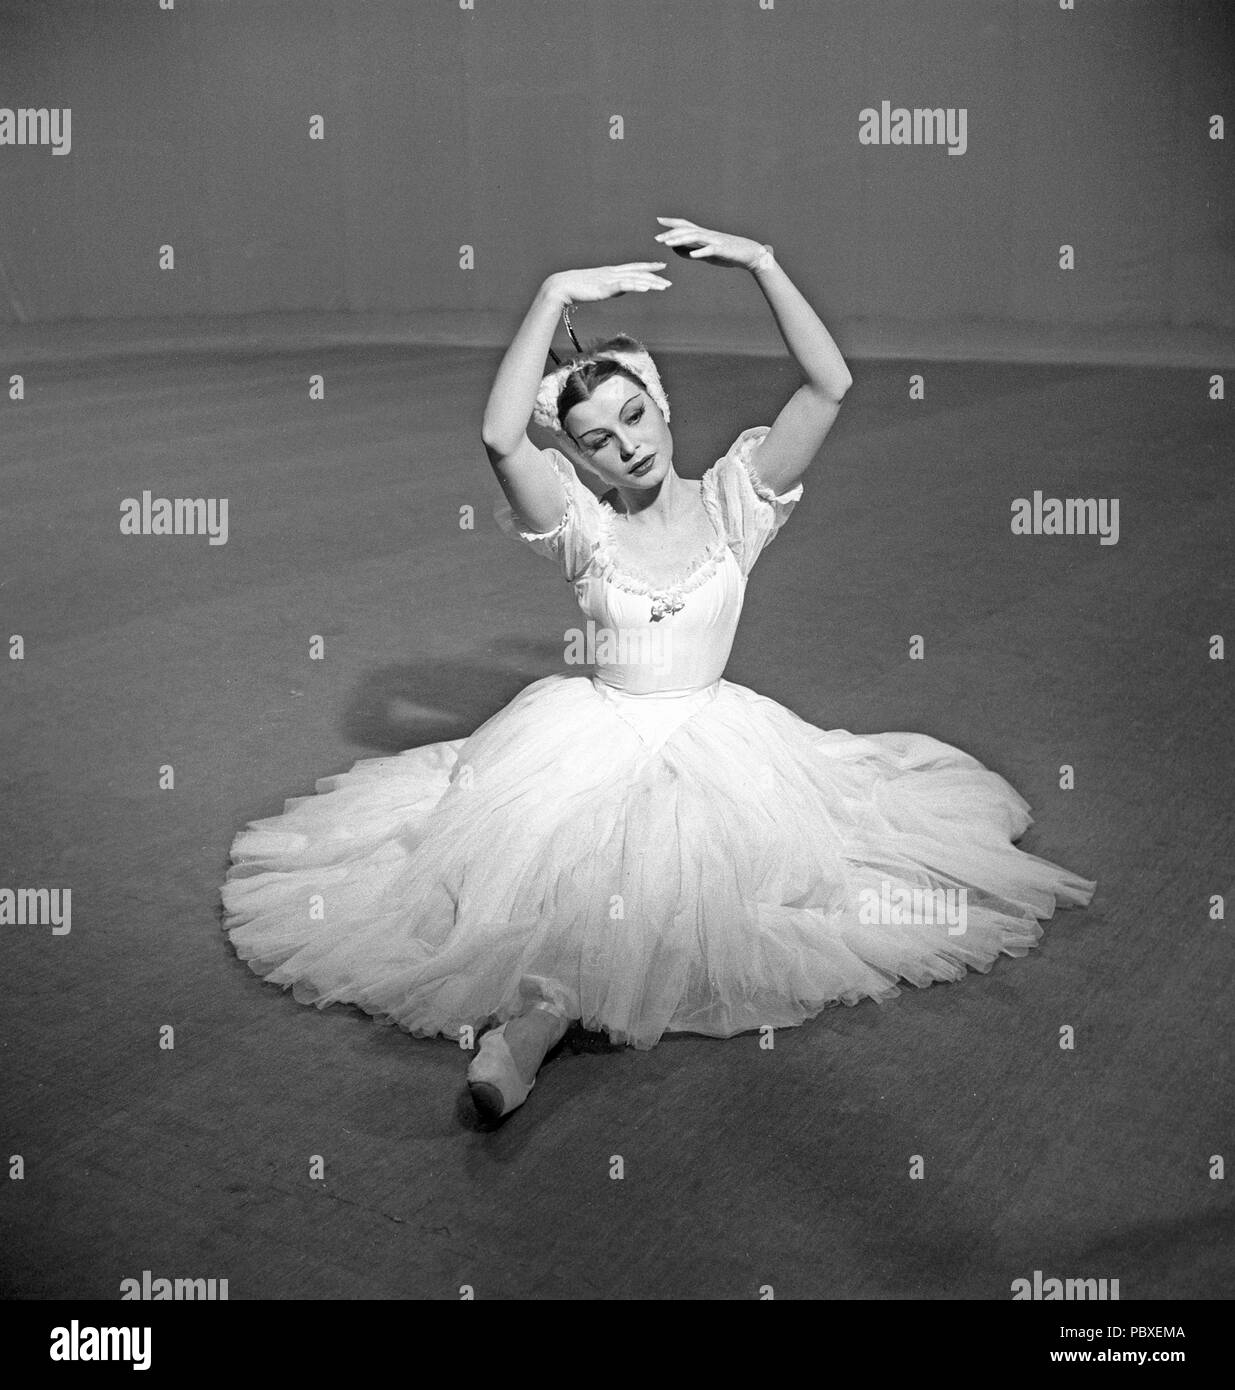 Swedish Ballerina High Resolution Stock Photography and Images - Alamy